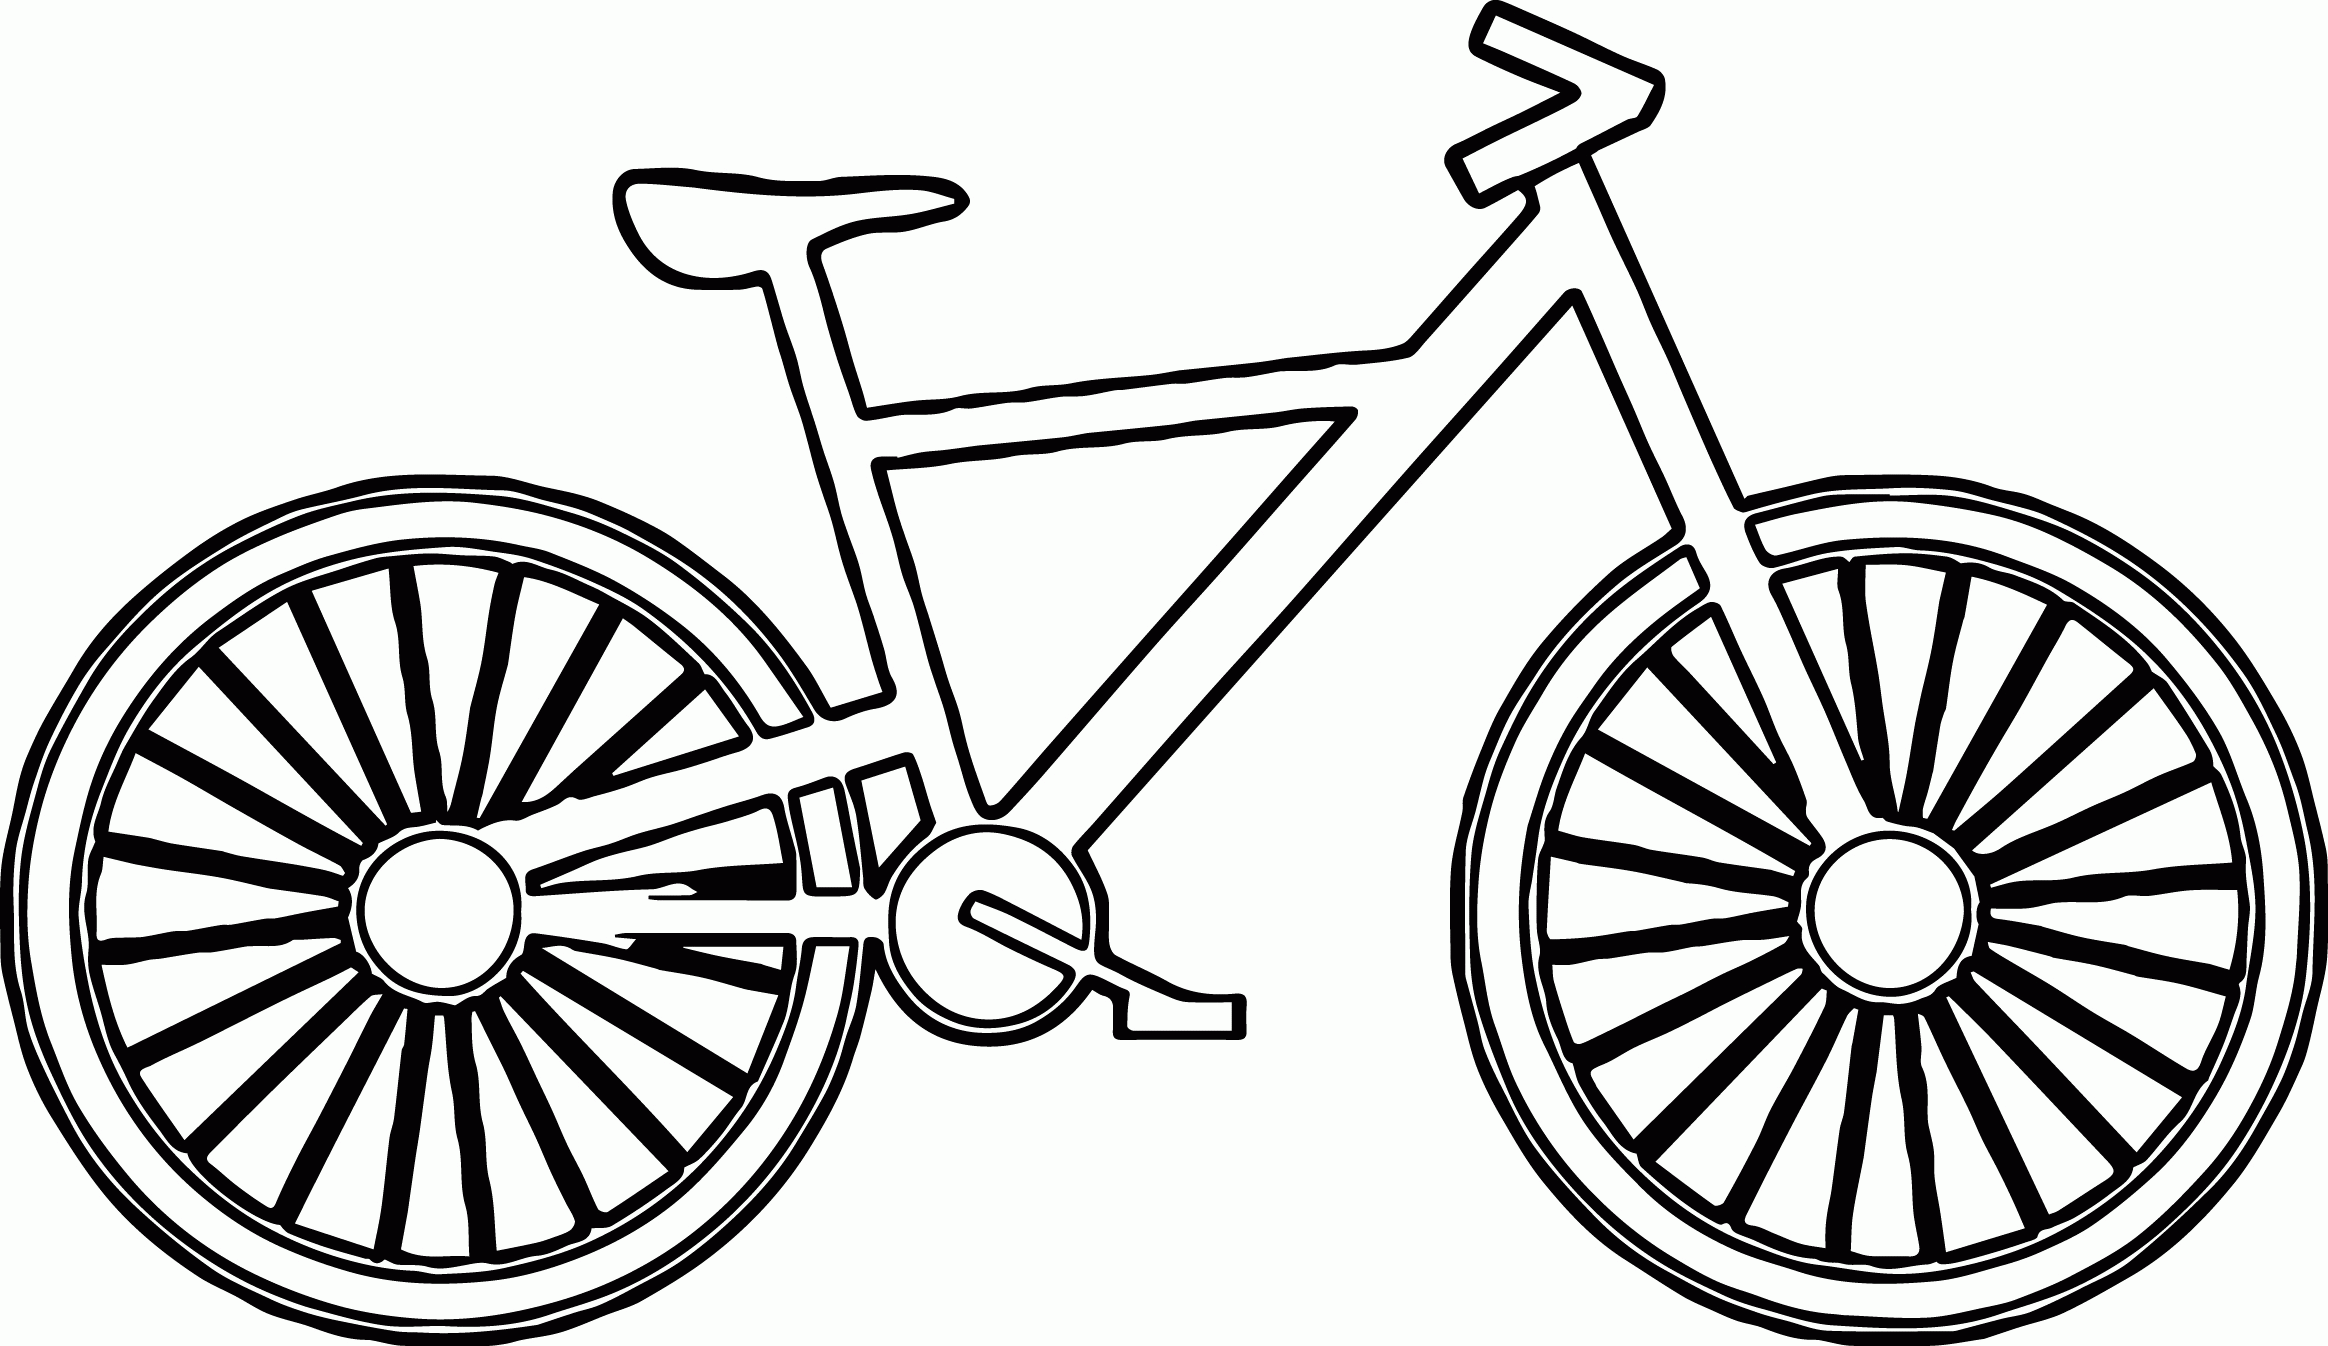 Nice Ride Bike Coloring Page For Everyone Cool Coloring Page